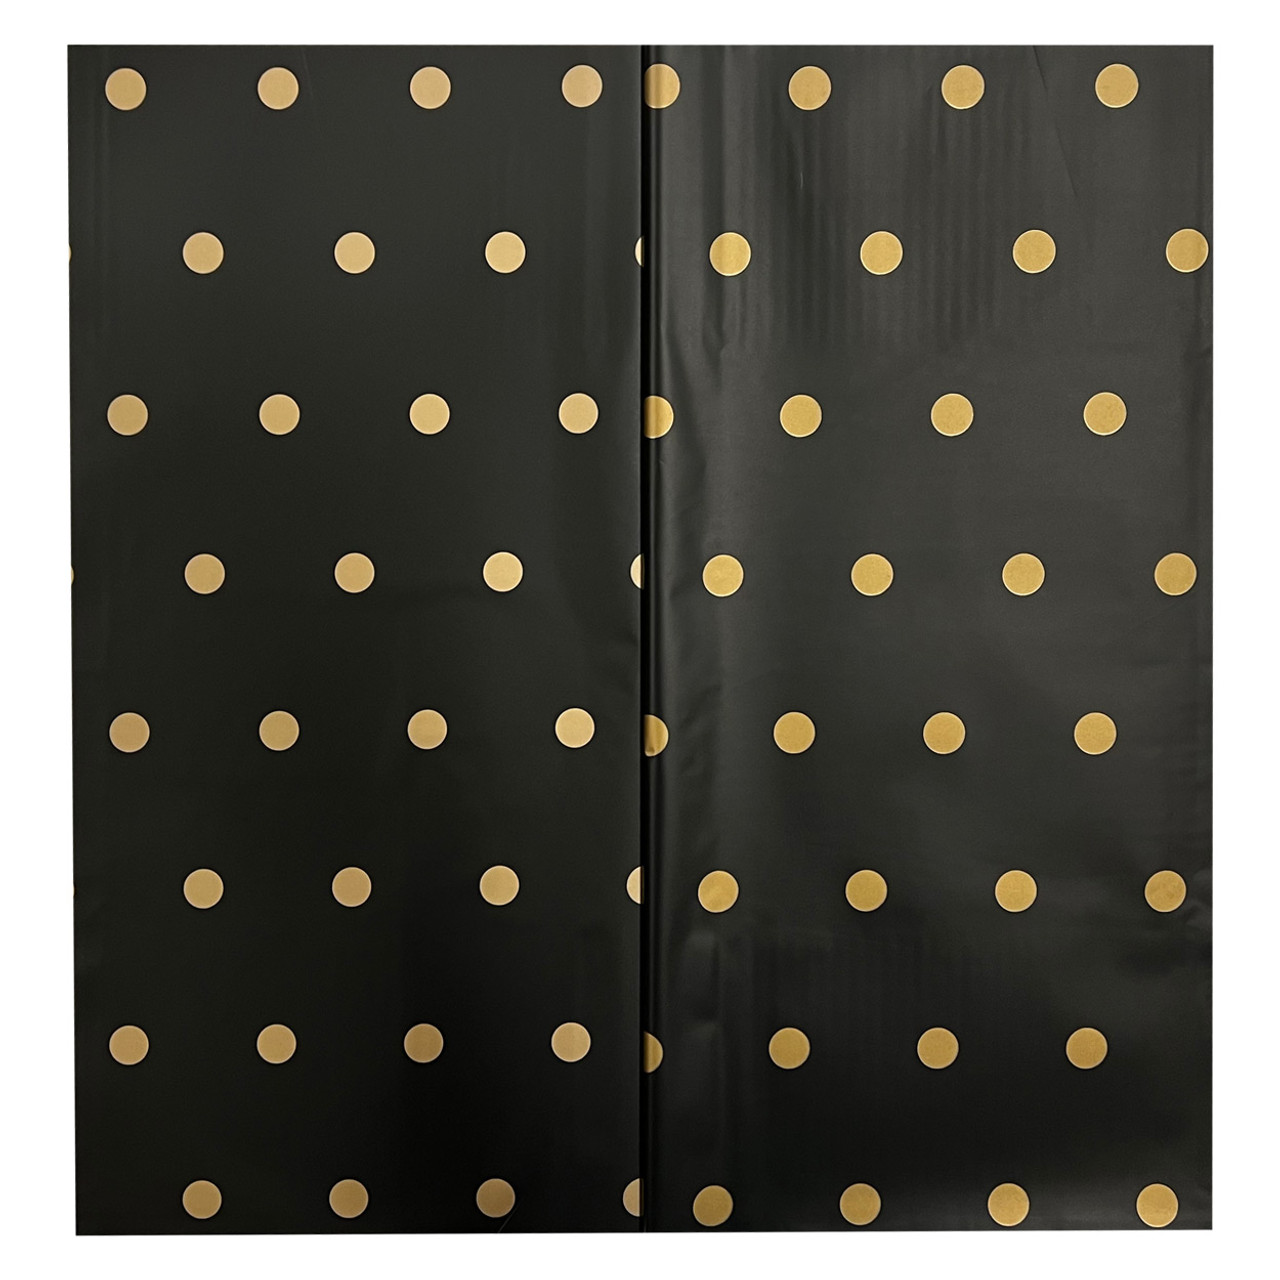 Black and Gold Polkadot Floral Wrapping Paper - 20 Sheets - LO